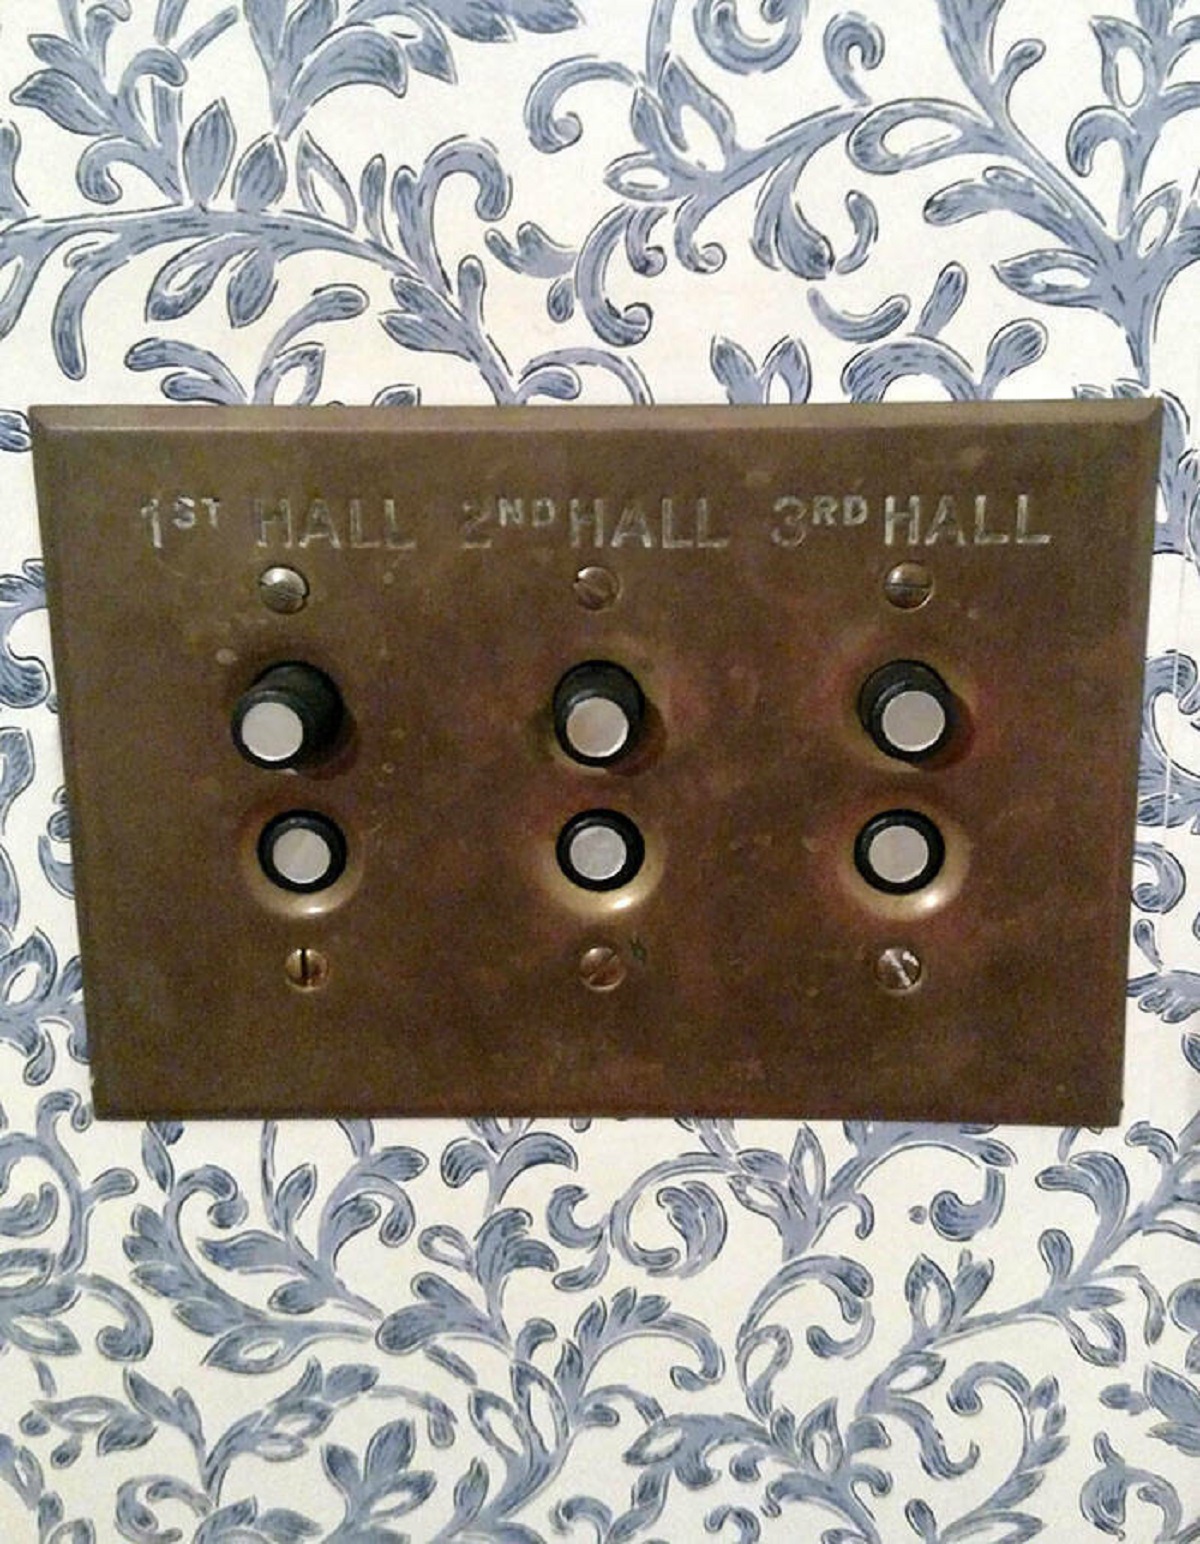 "My House Still Has Old-Fashioned Light Switches From Its Original Construction"